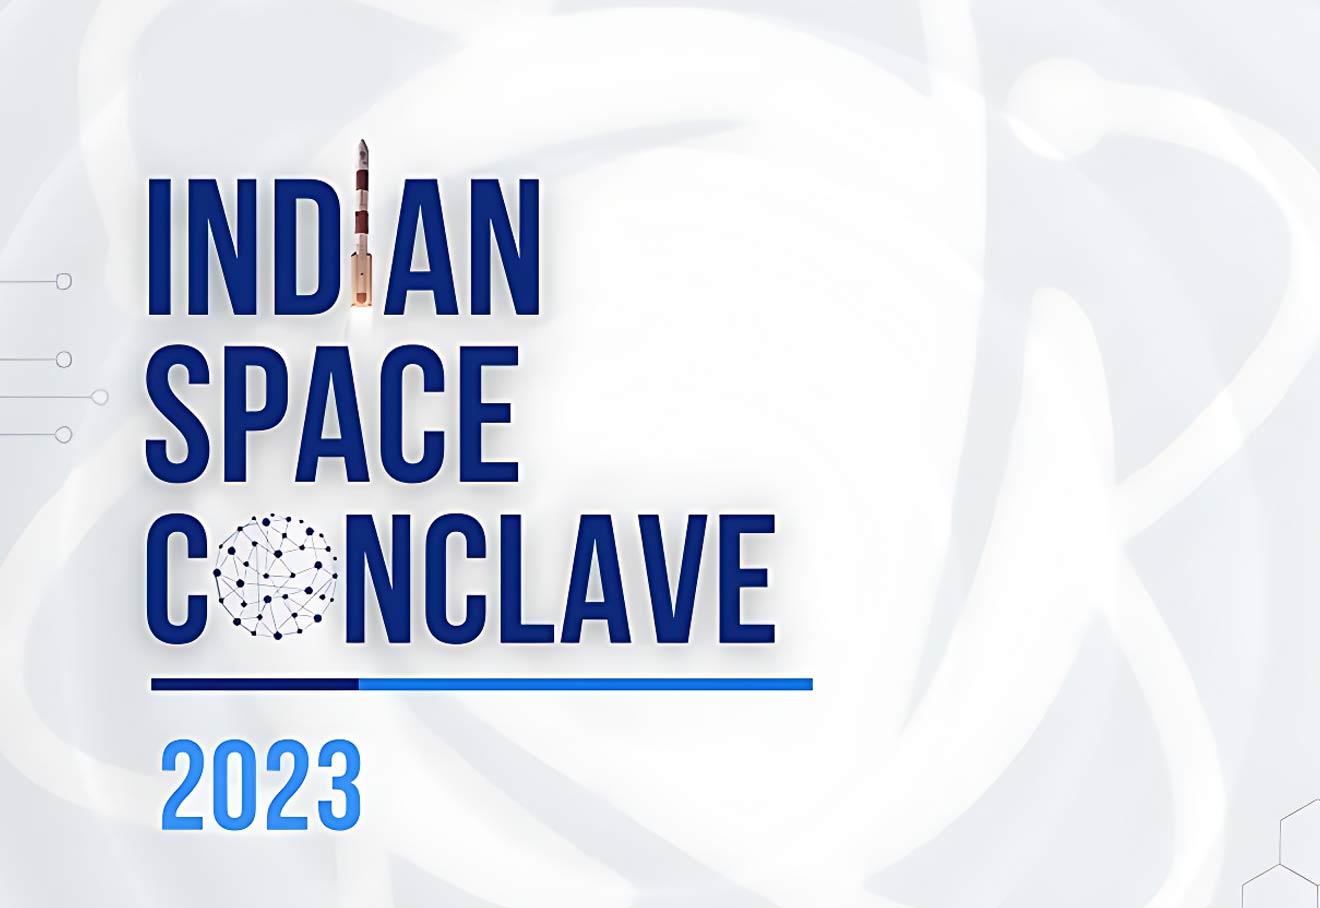 Indian Space Conclave 2023 to unite Global Leaders to Shape the Future of Space